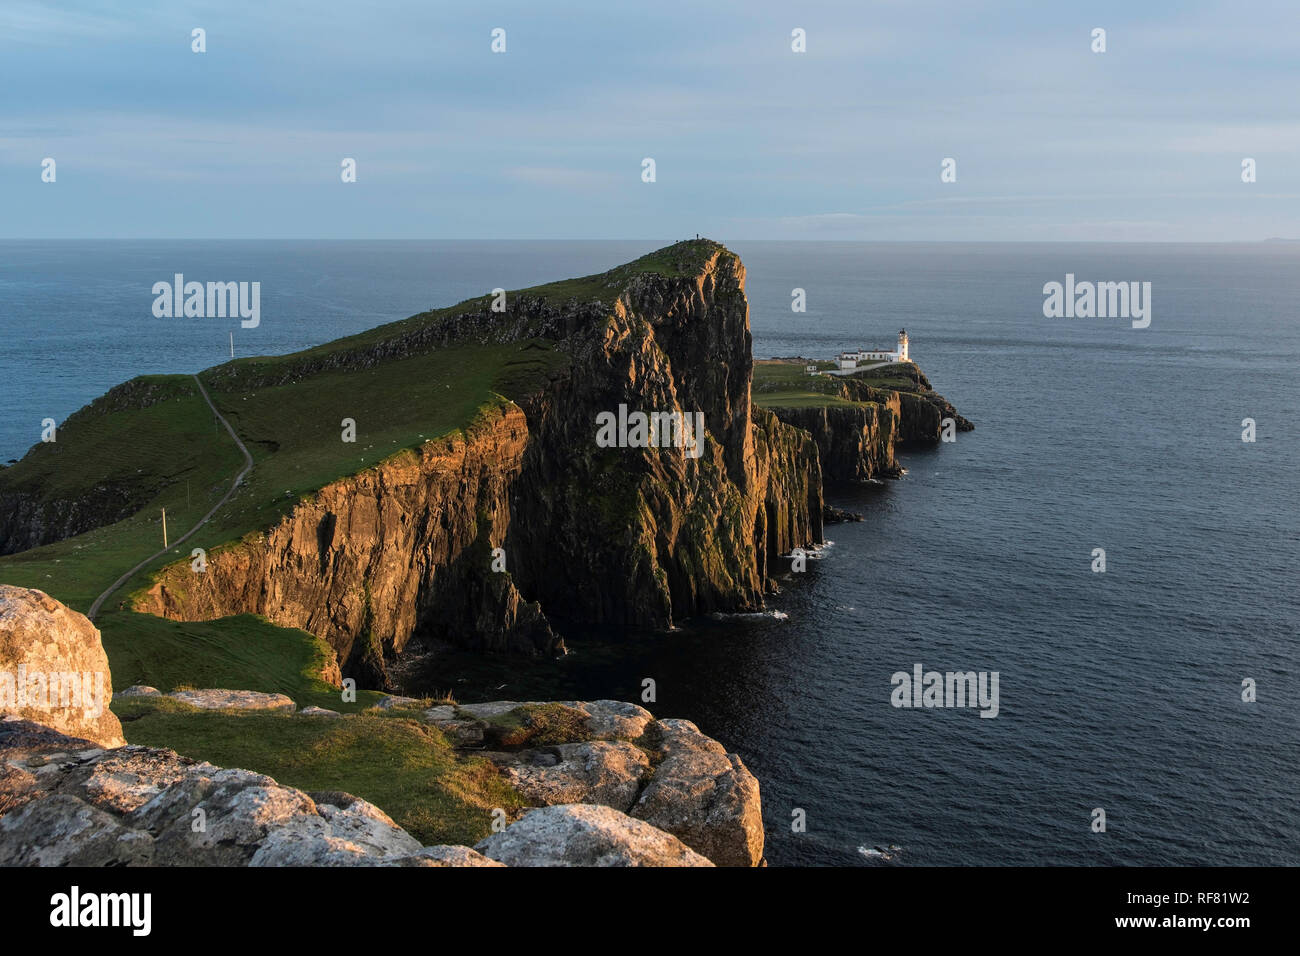 Neist Point is a small peninsula on the Scottish island Skye and marks the most western point of the island with her lighthouse., Neist Point ist eine Stock Photo